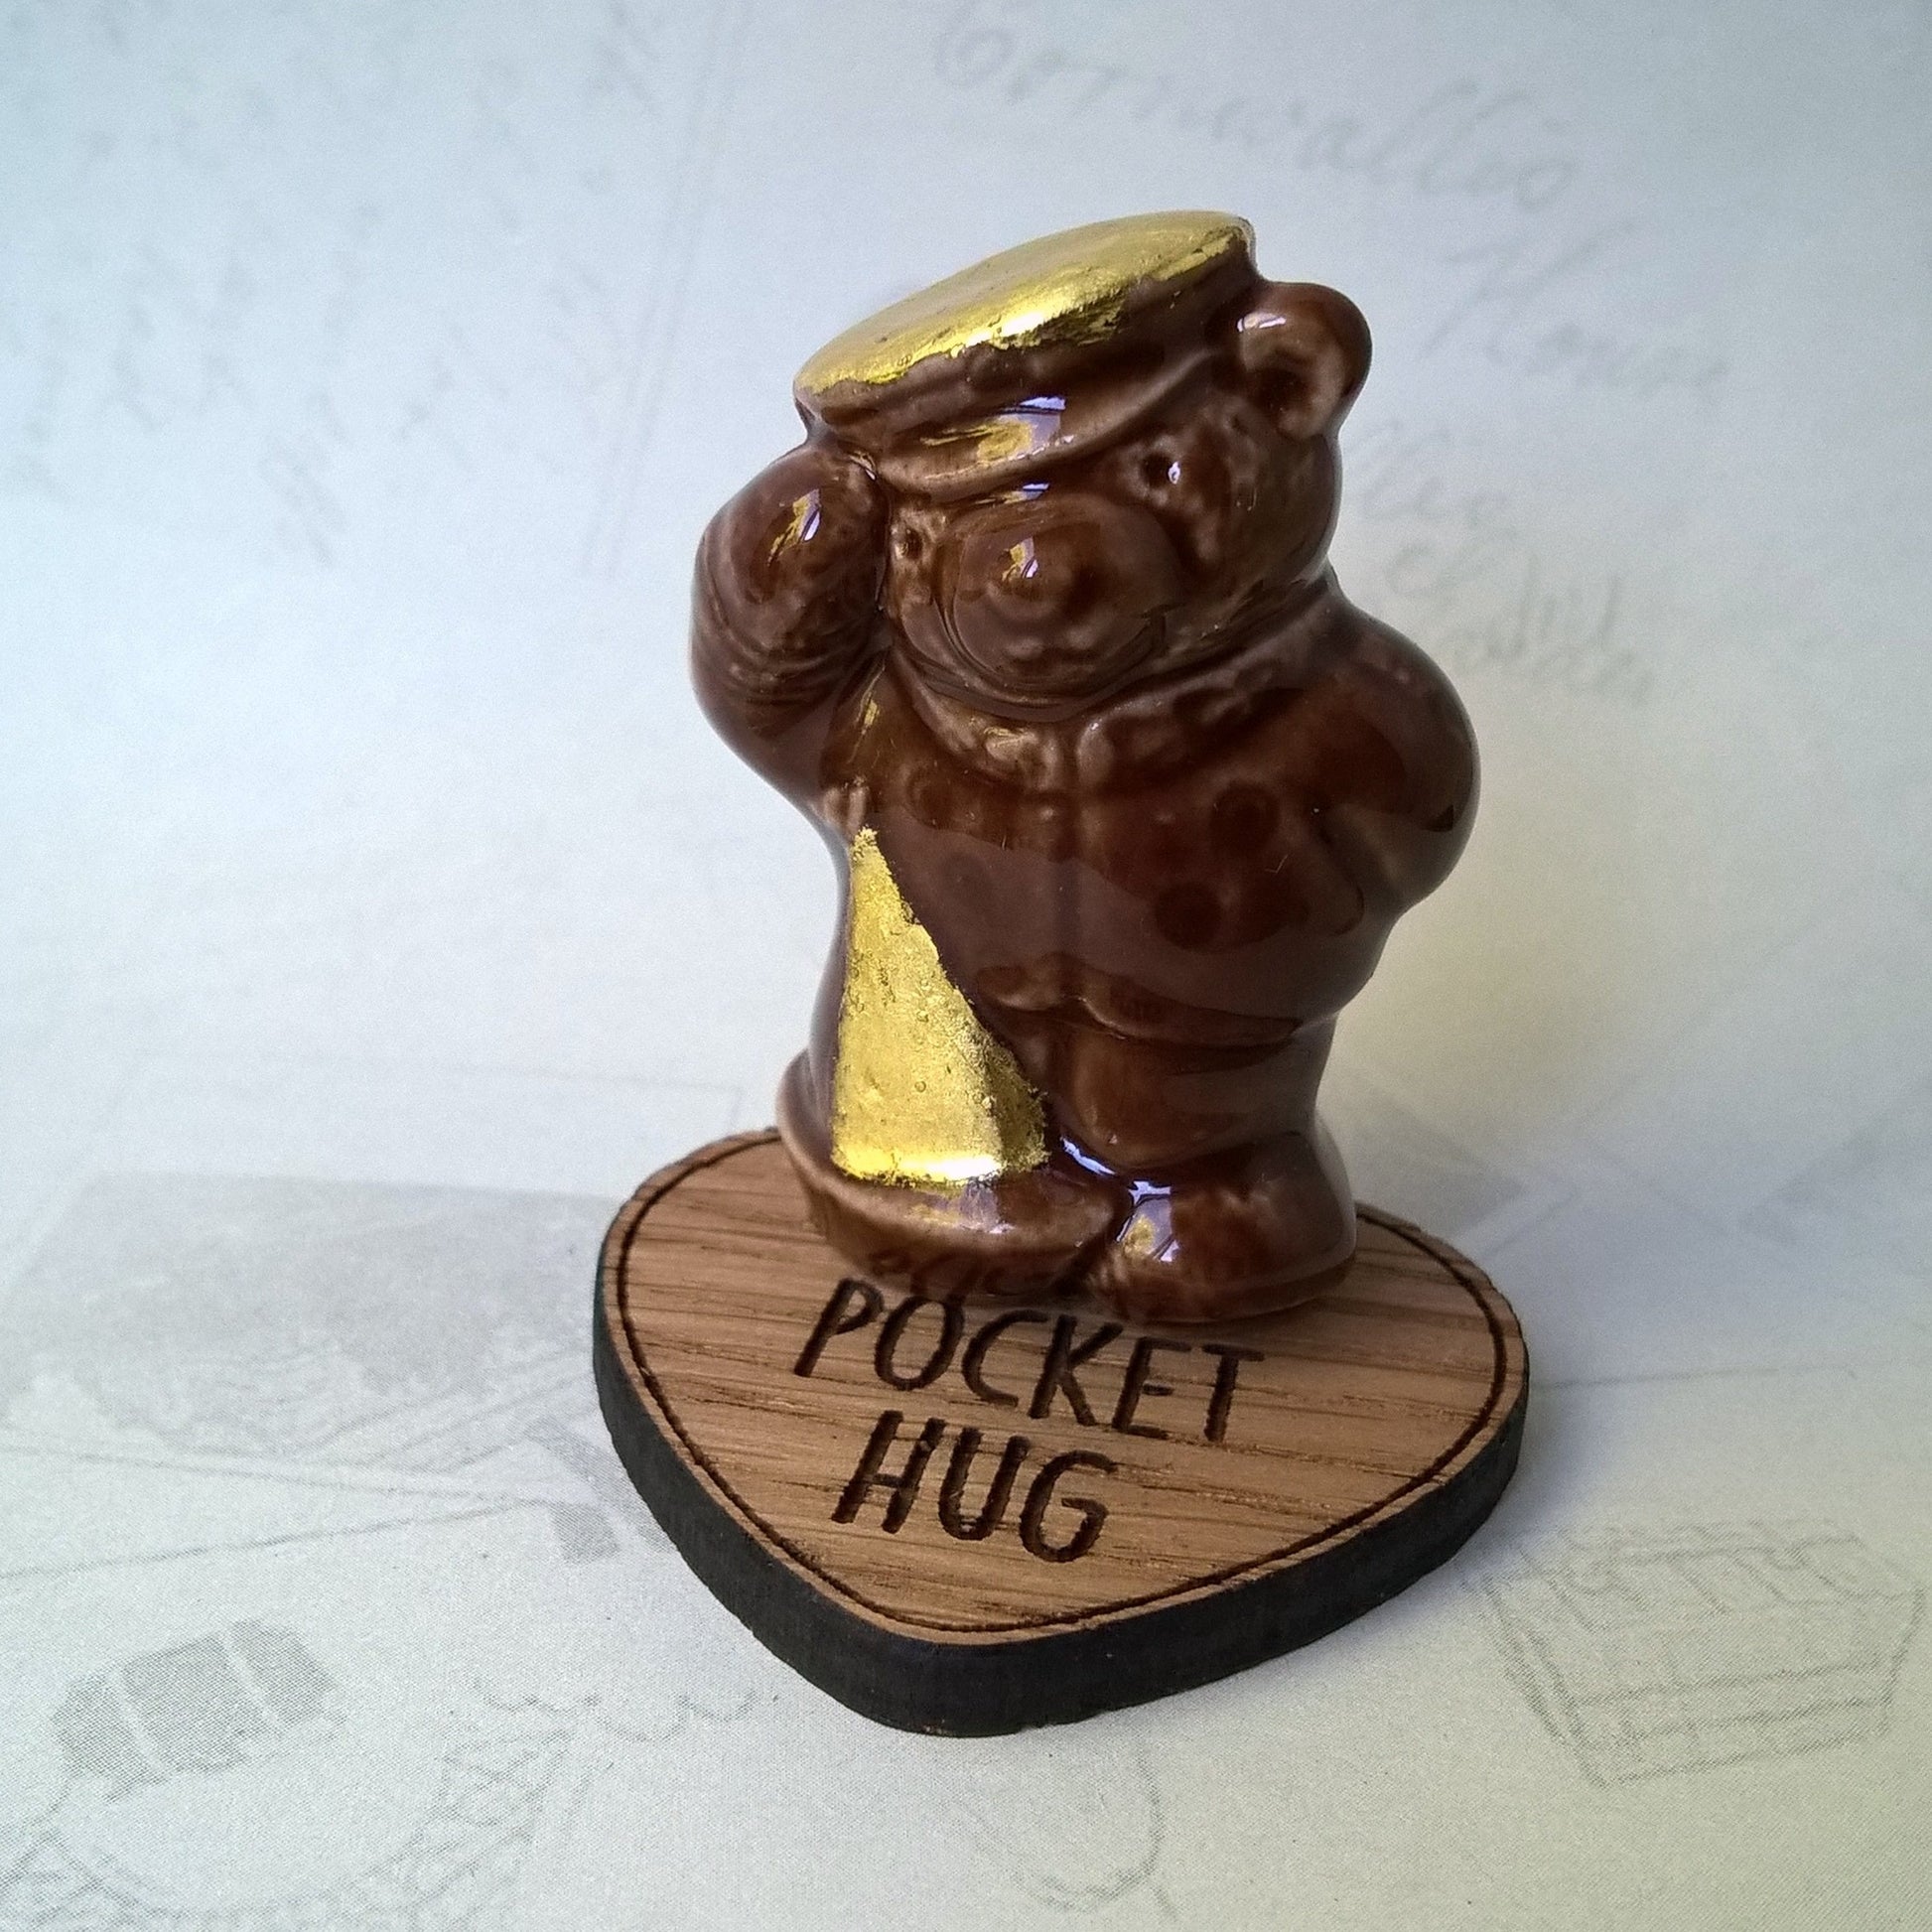 The wooden heart pocket hug can be used as a stand and surface protector for the little ceramic bears